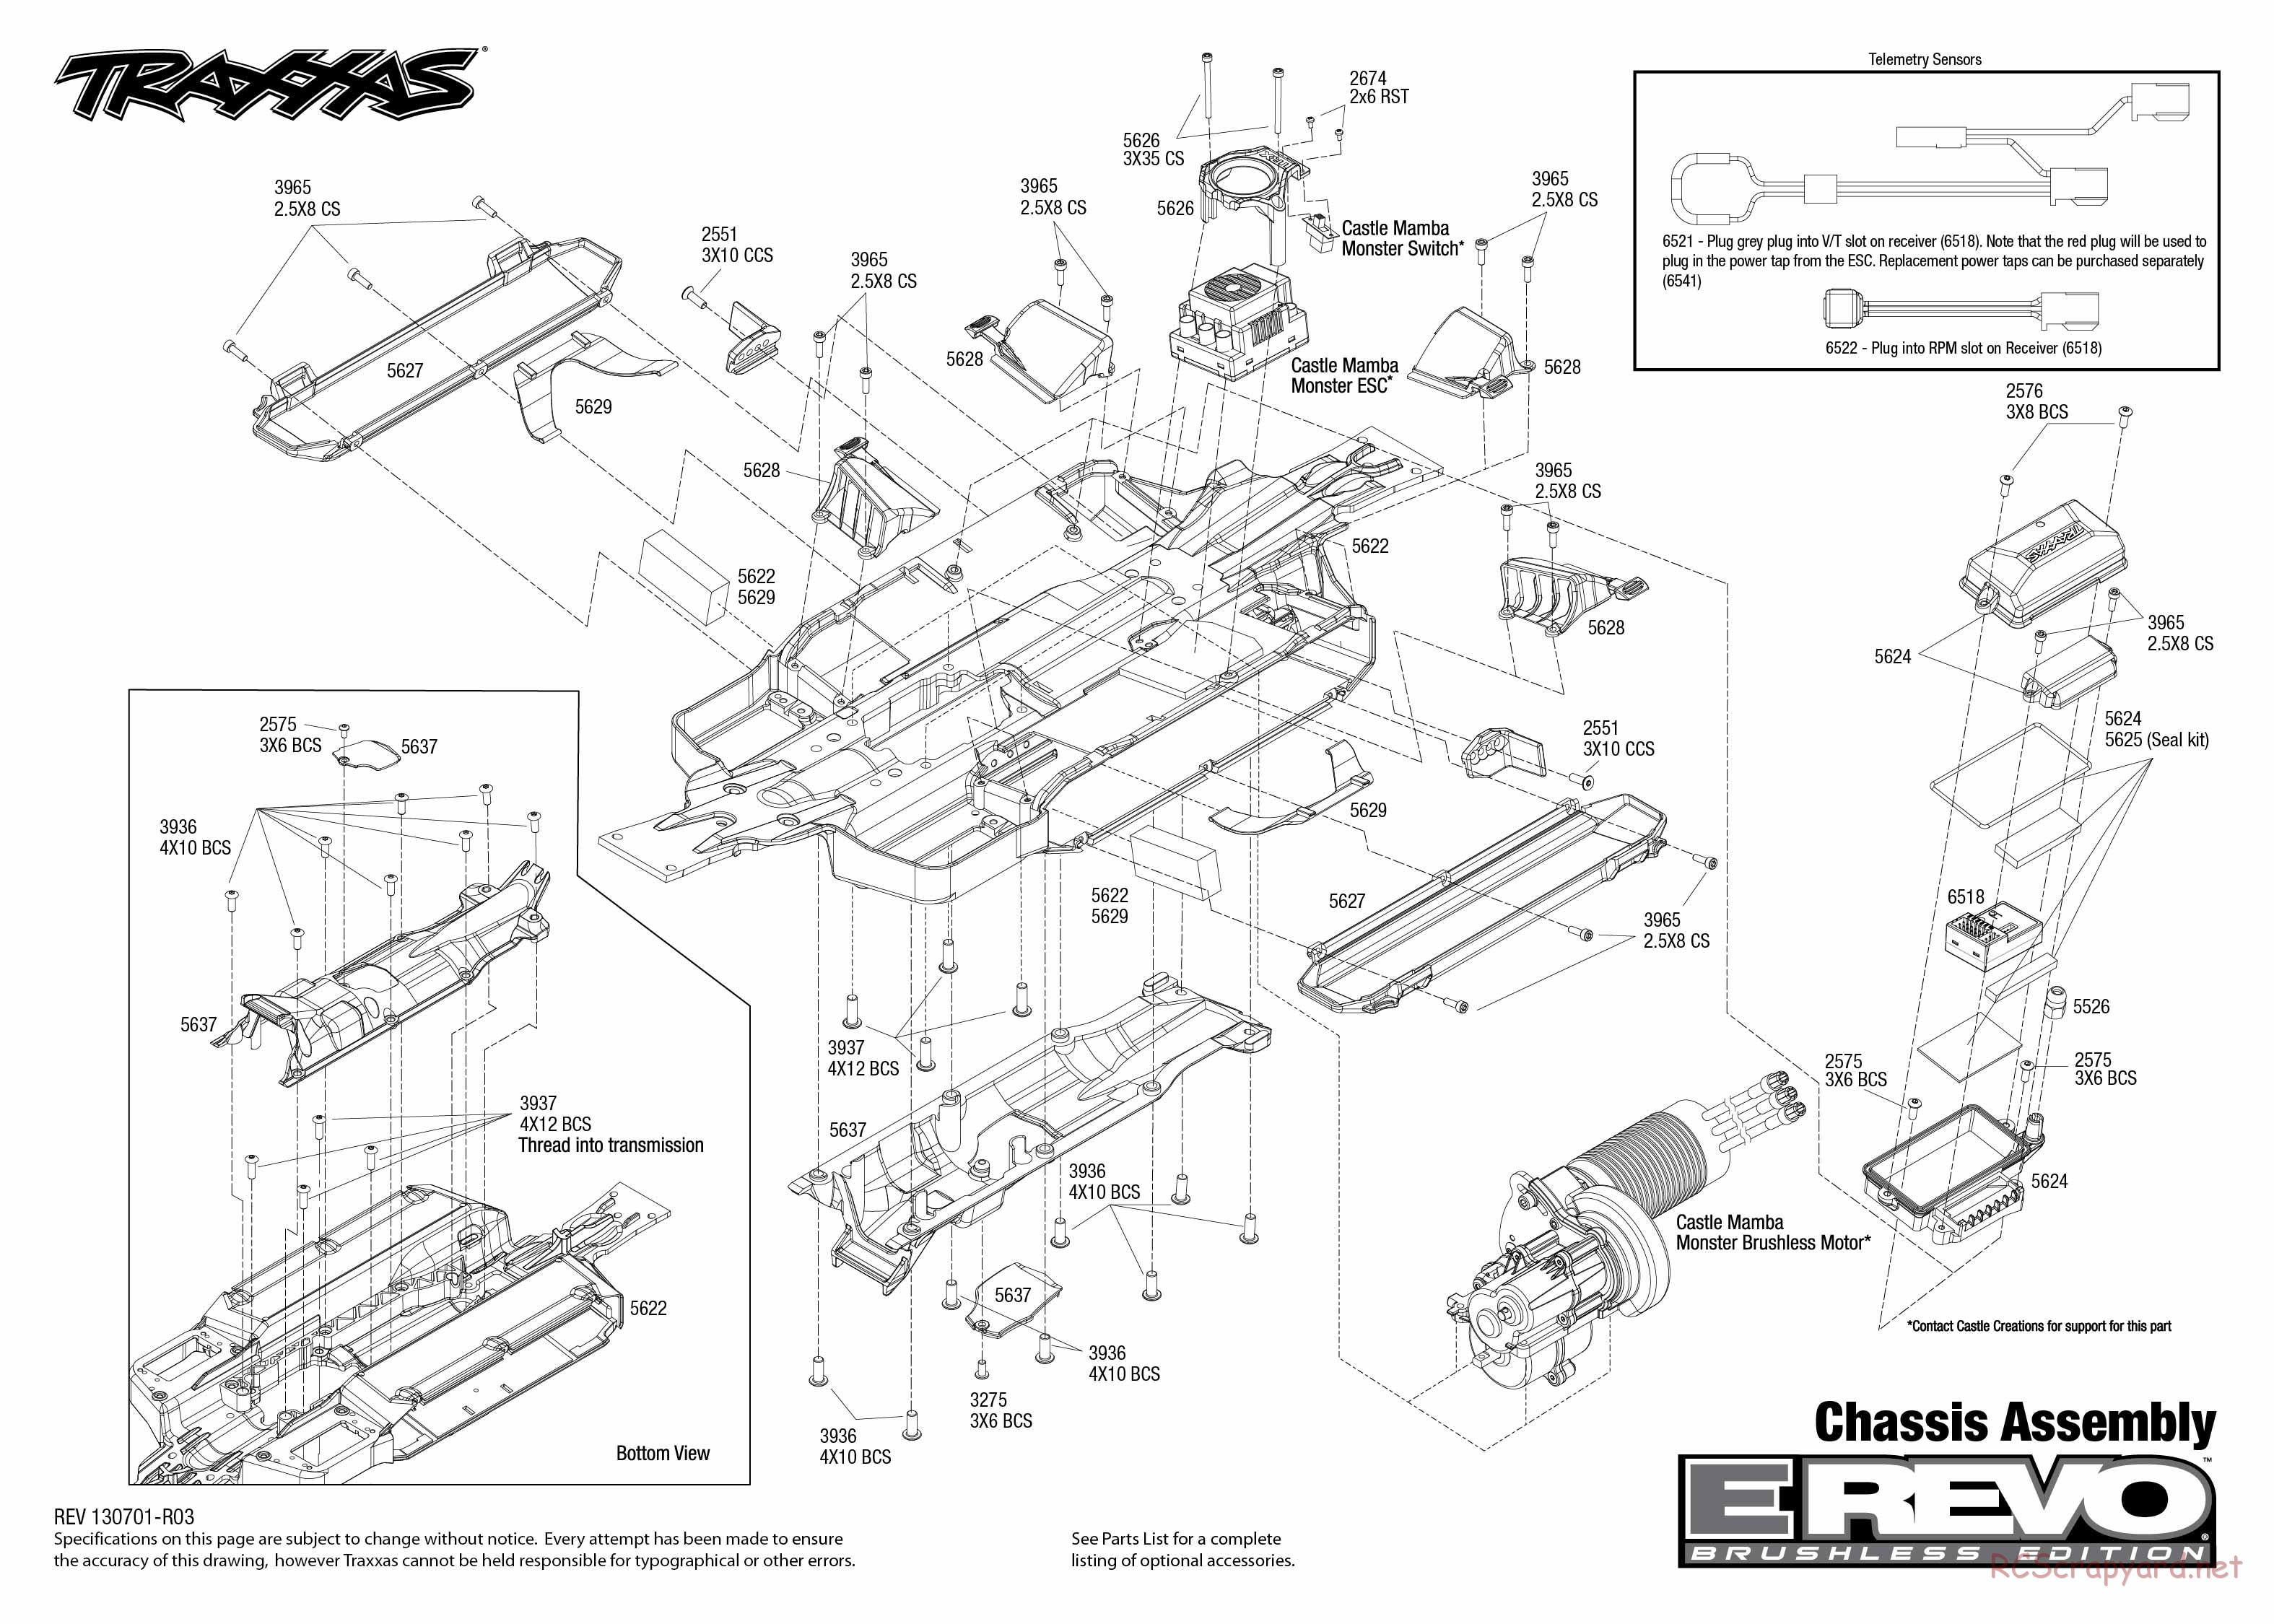 Traxxas - E-Revo Brushless (2012) - Exploded Views - Page 4